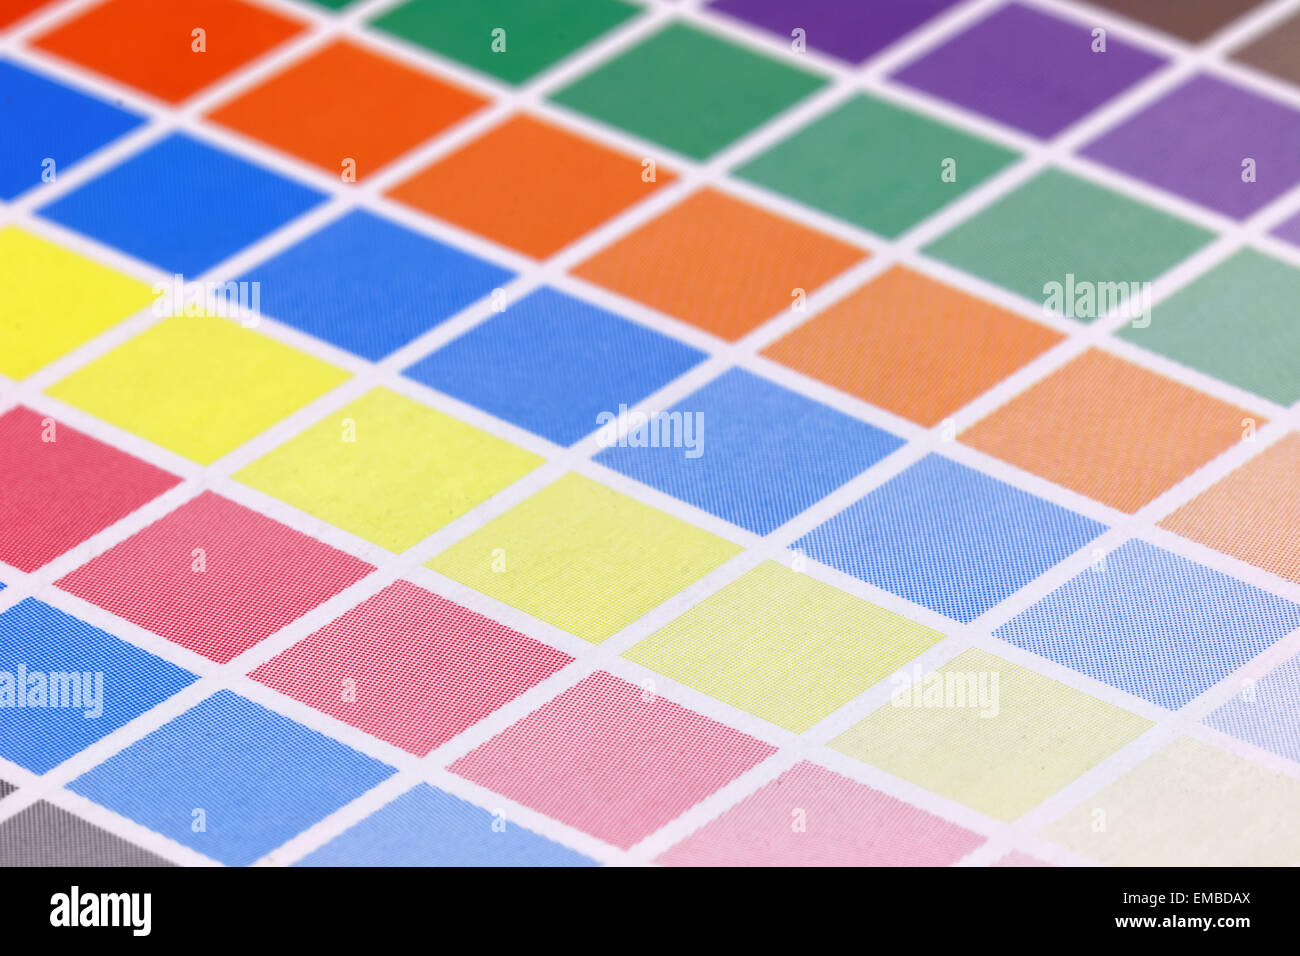 Close-up of a a cmyk test print with many color squares. Side view, short of focus Stock Photo Alamy